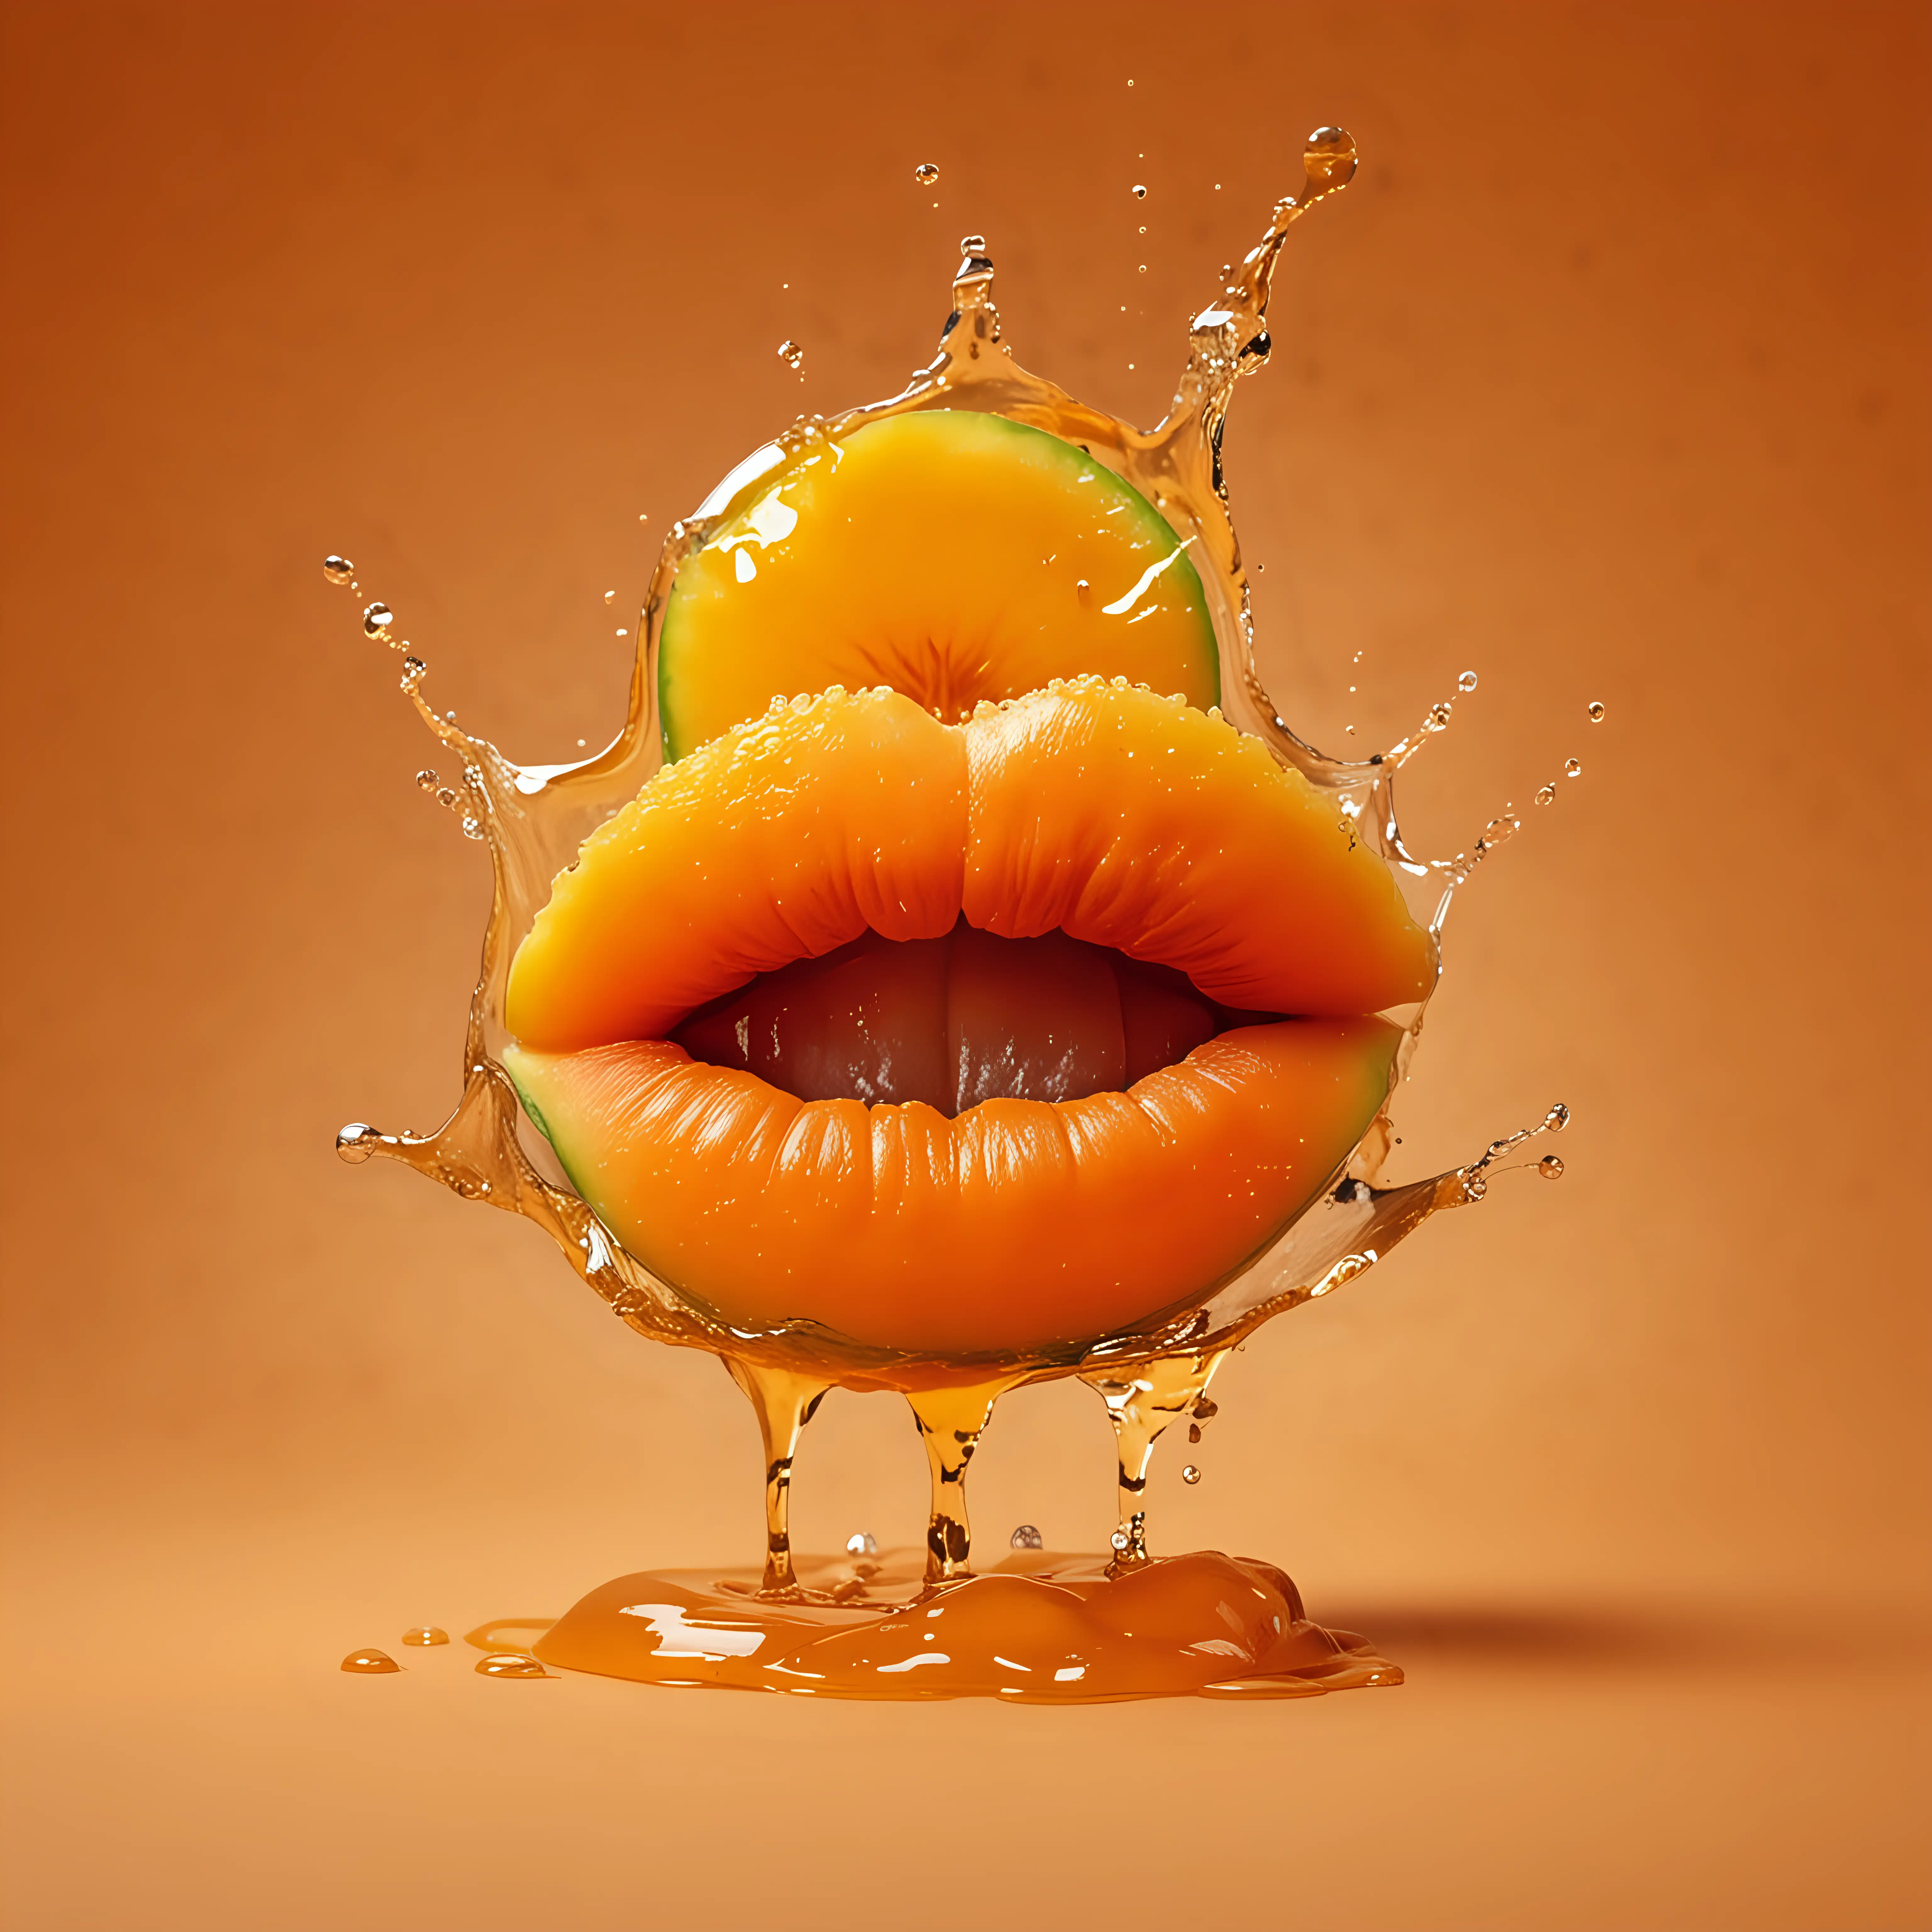 Delicious-Melon-Slices-Dripping-with-Caramel-Honey-on-Vibrant-Orange-Background